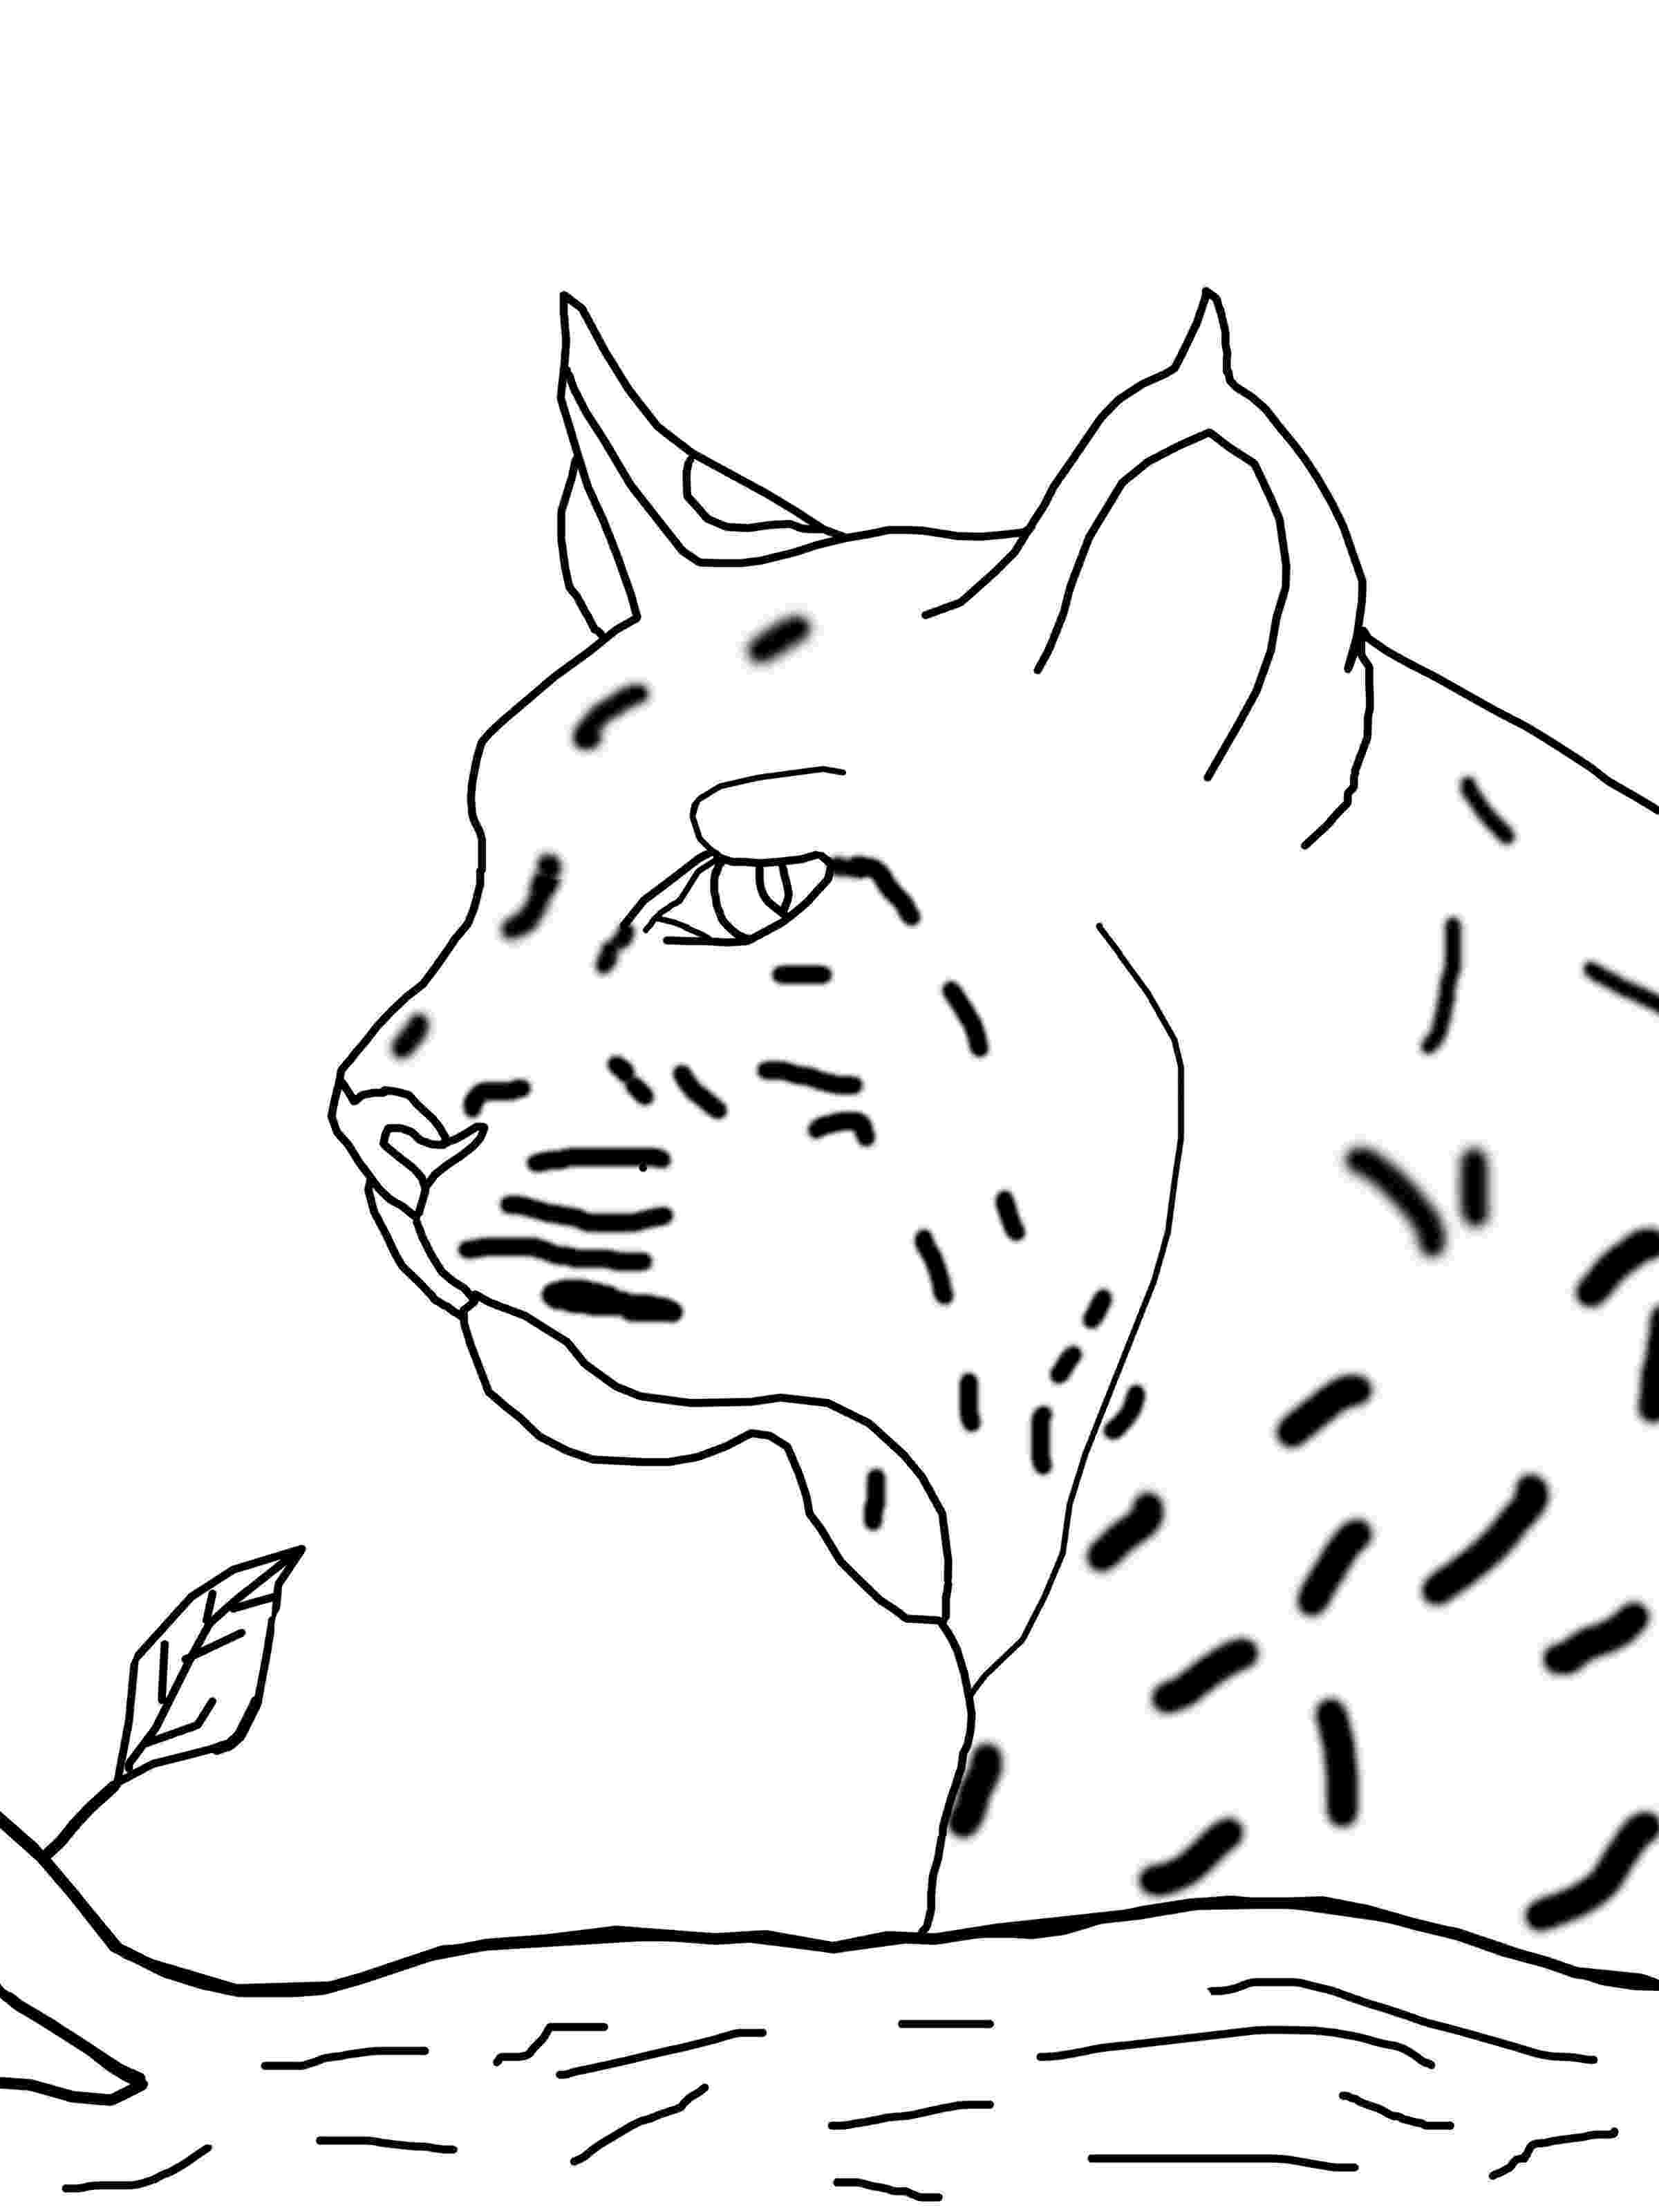 color page bobcat coloring pages to download and print for free page color 